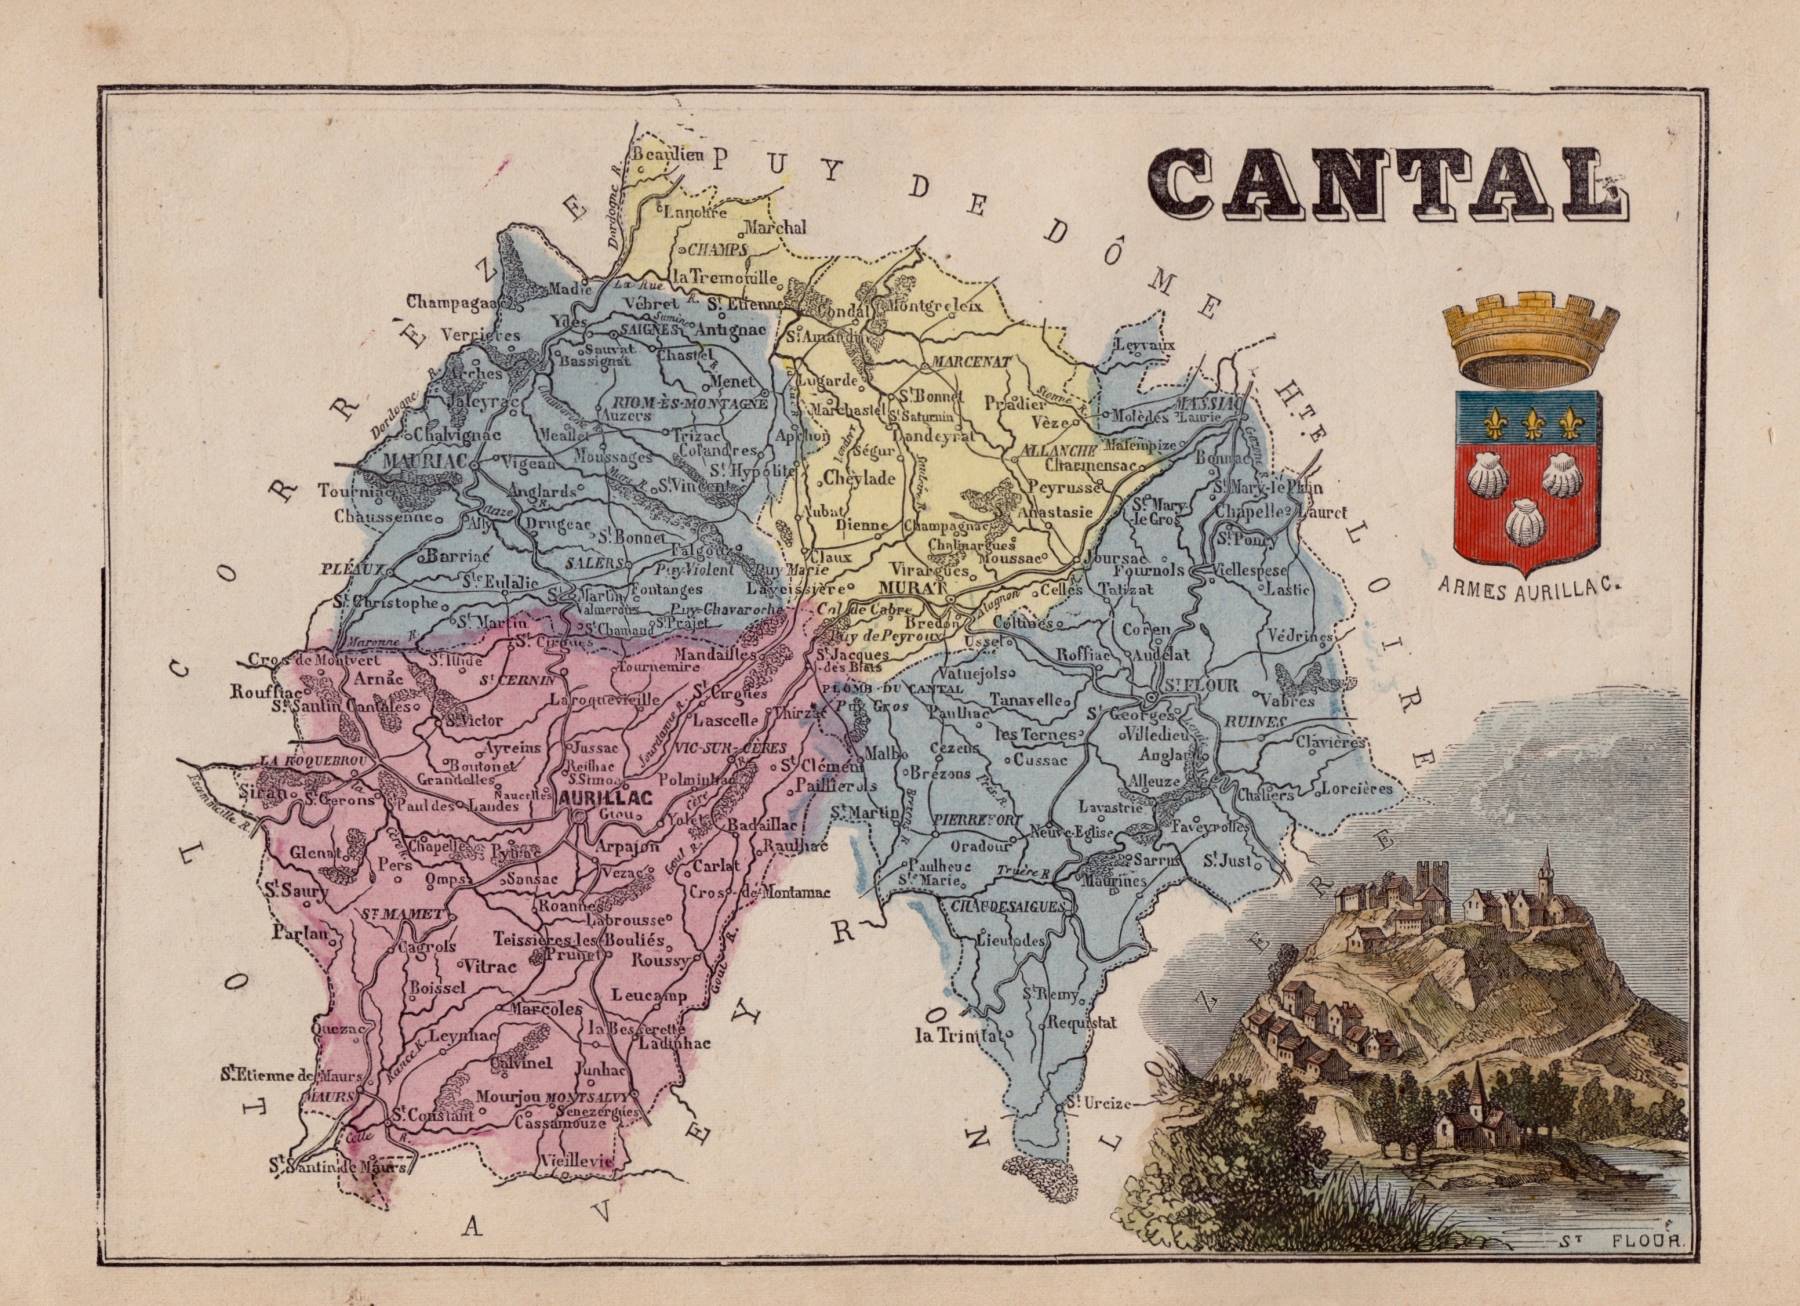 Charente & Cantal